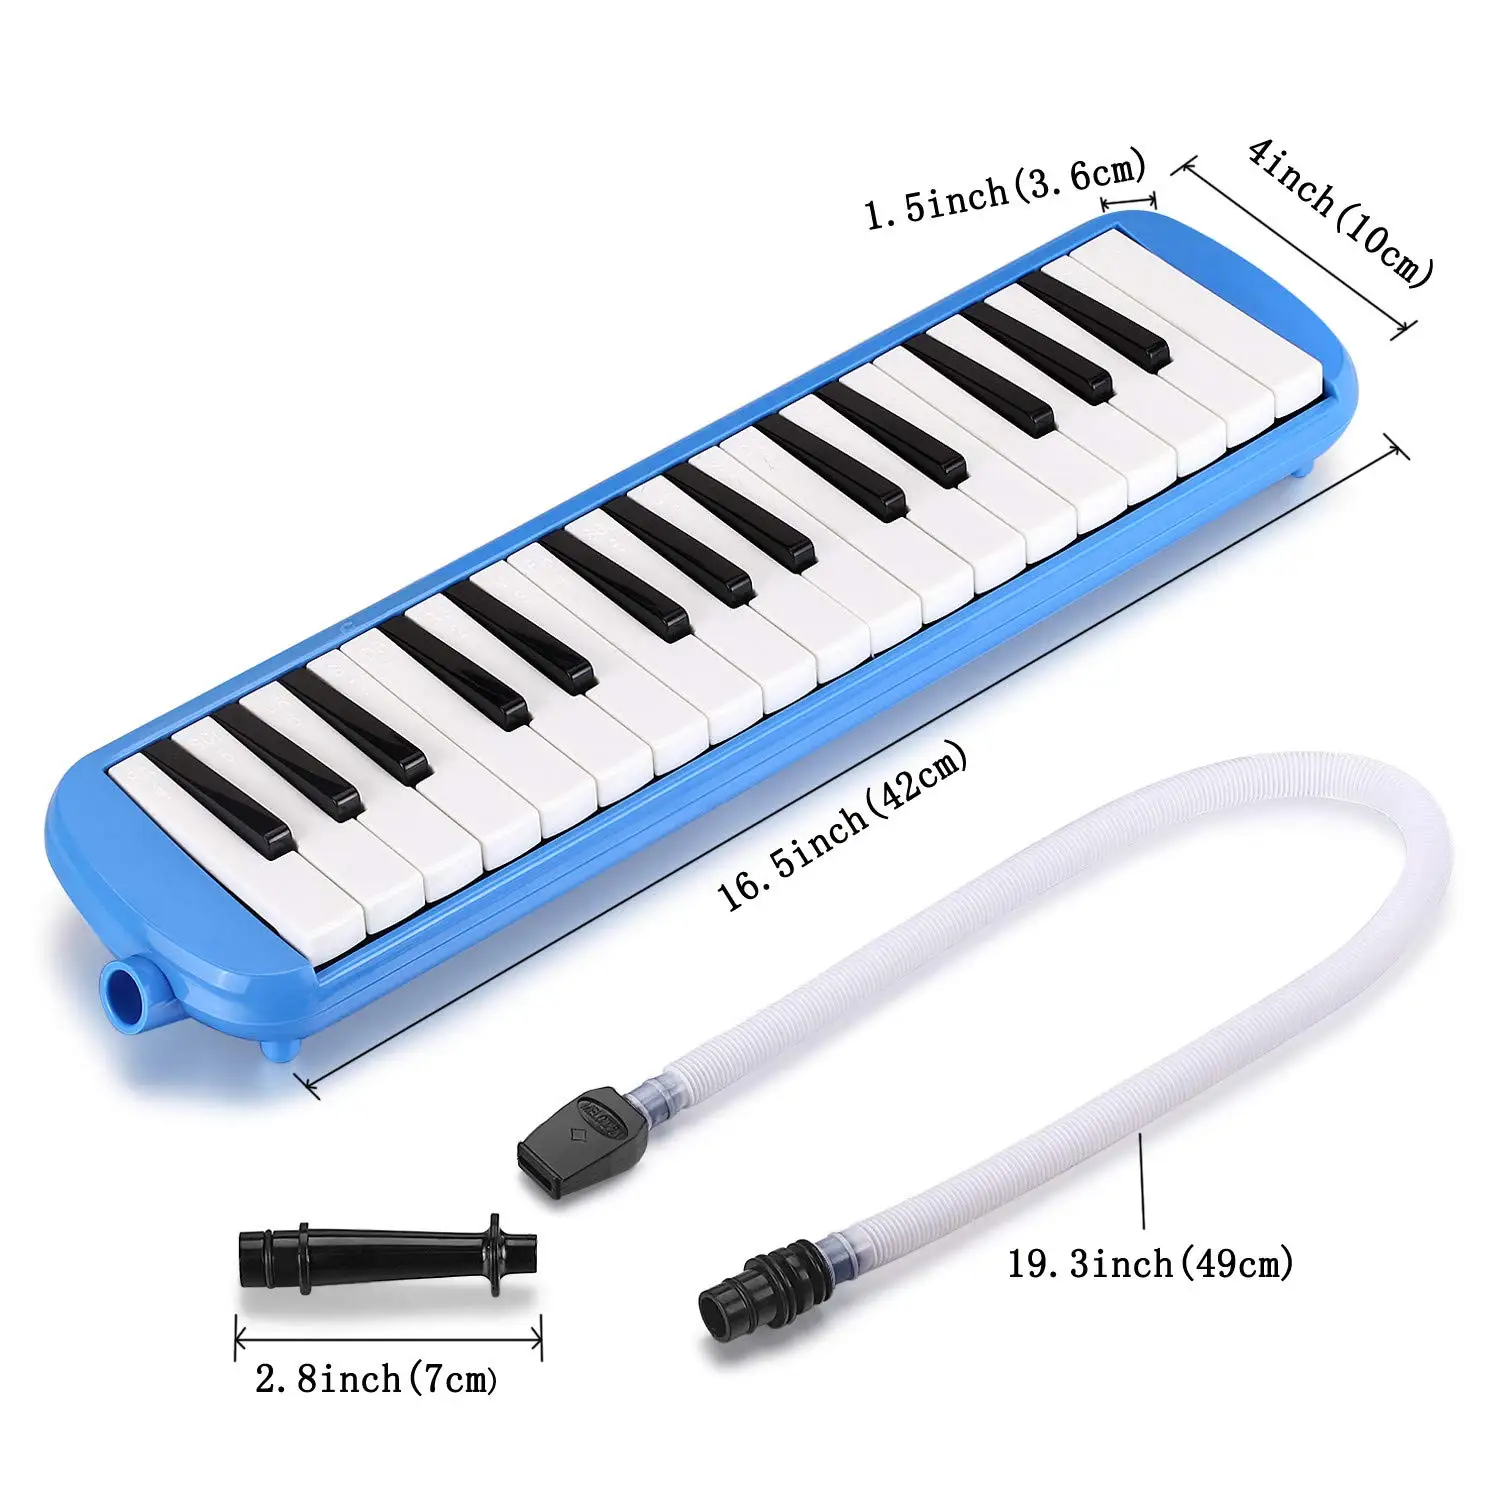 Festnight 32 Key Melodica Mouthpiece Bag Piano Style Pianica with Carrying Bag and Cleaning Cloth 32-Key Portable Melodica Red 